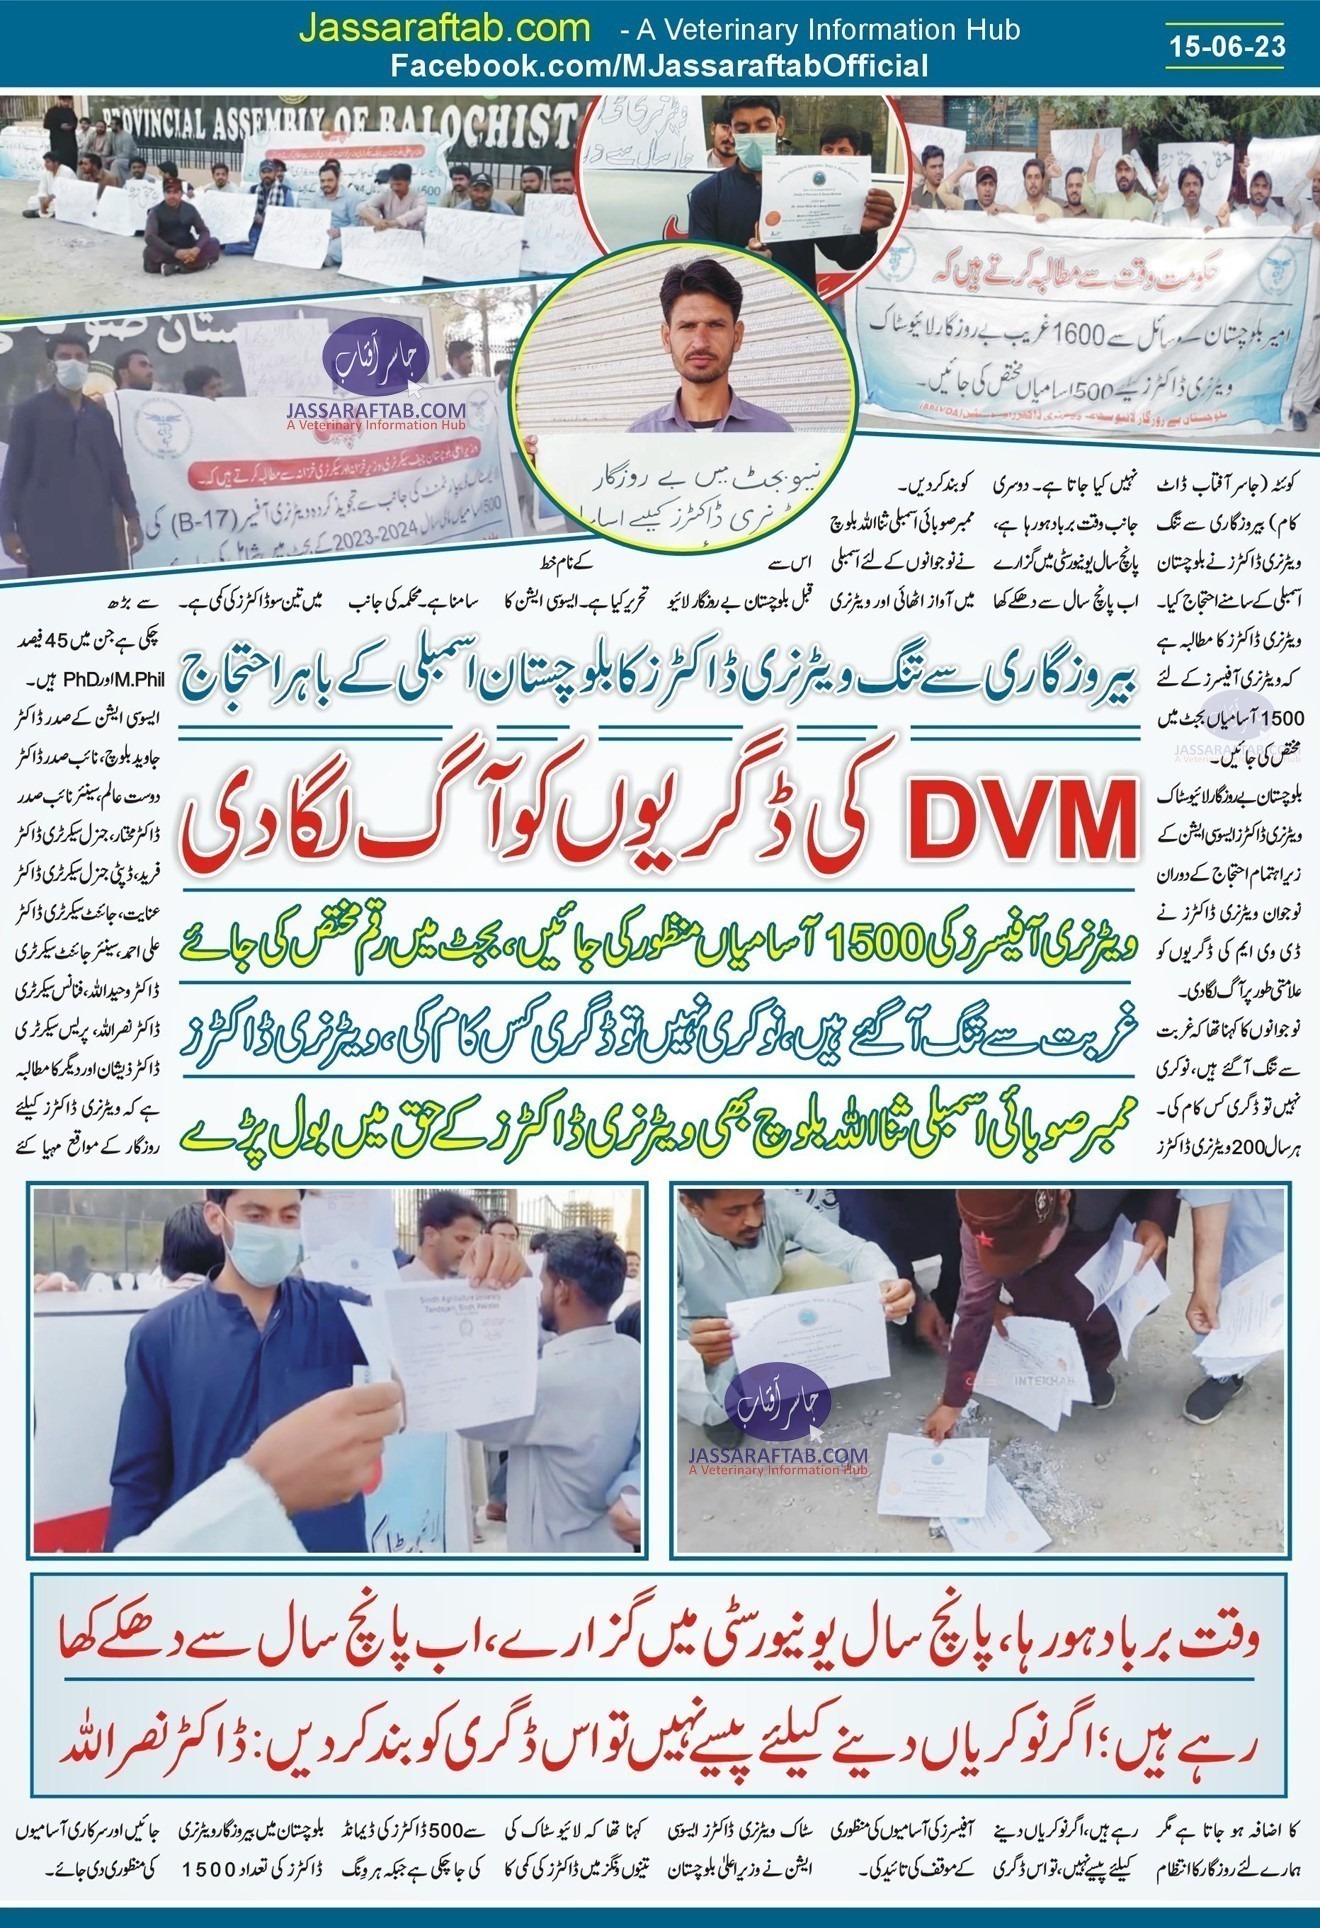 DVM degrees set on fire during Unemployed Veterinary Doctors' Protest in Quetta